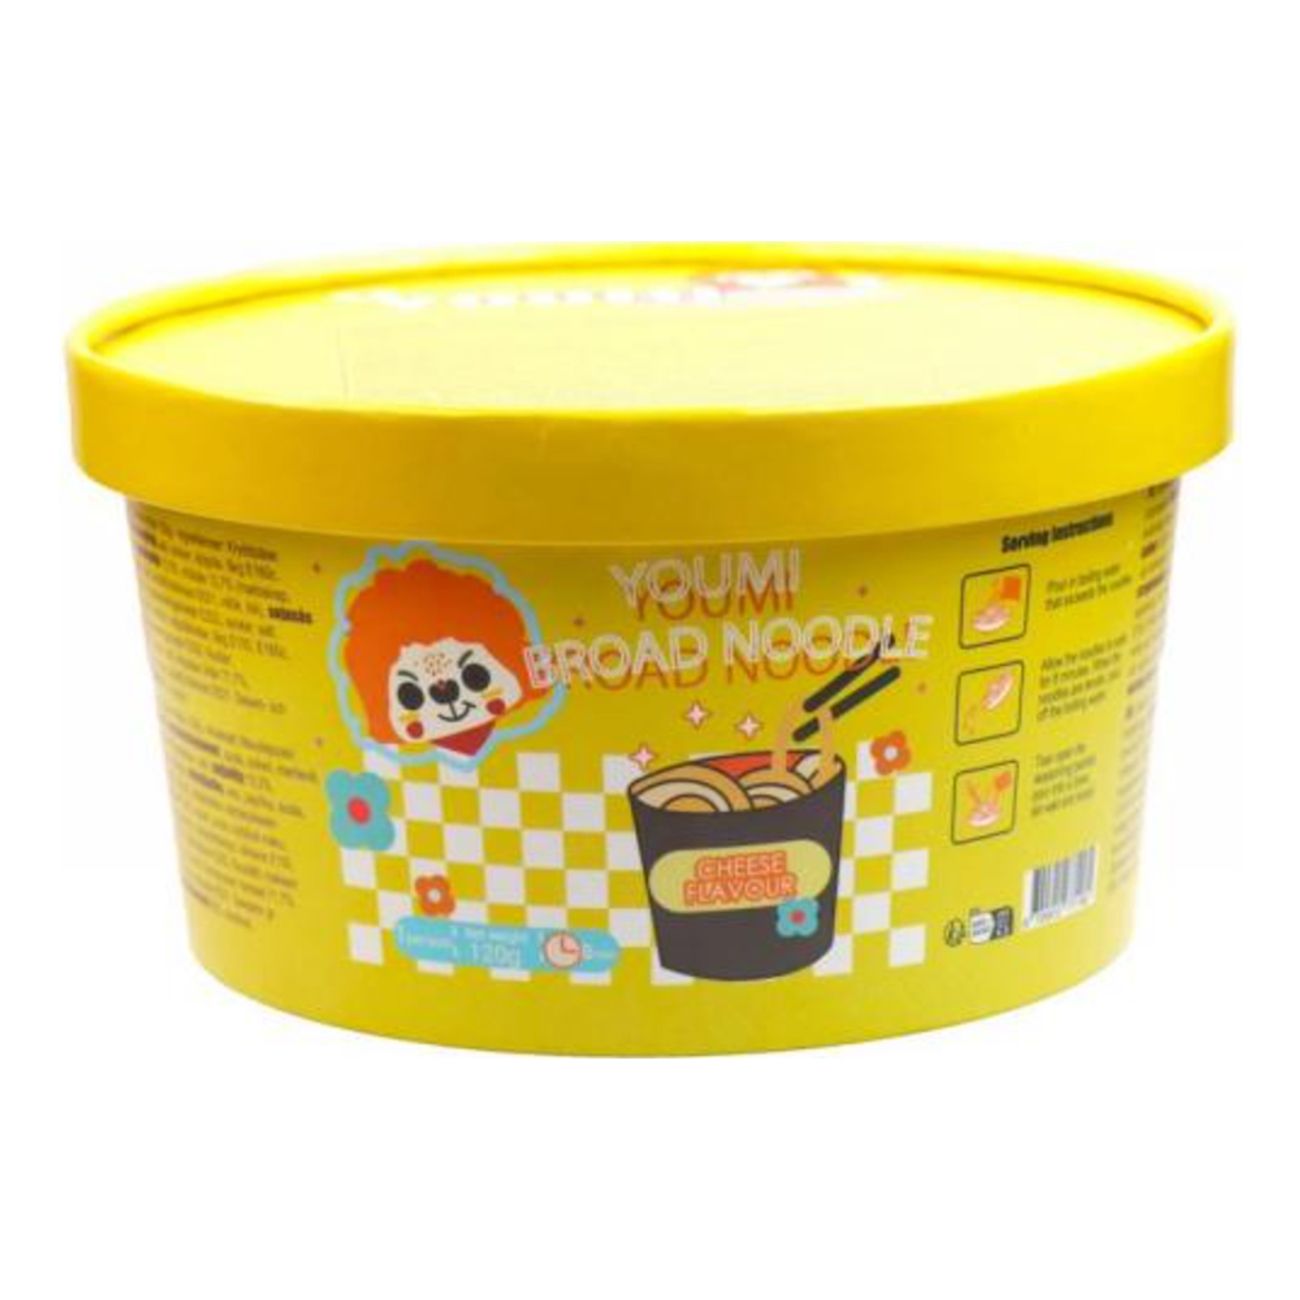 youmi-instant-broad-noodle-cheese-flavour-100884-1